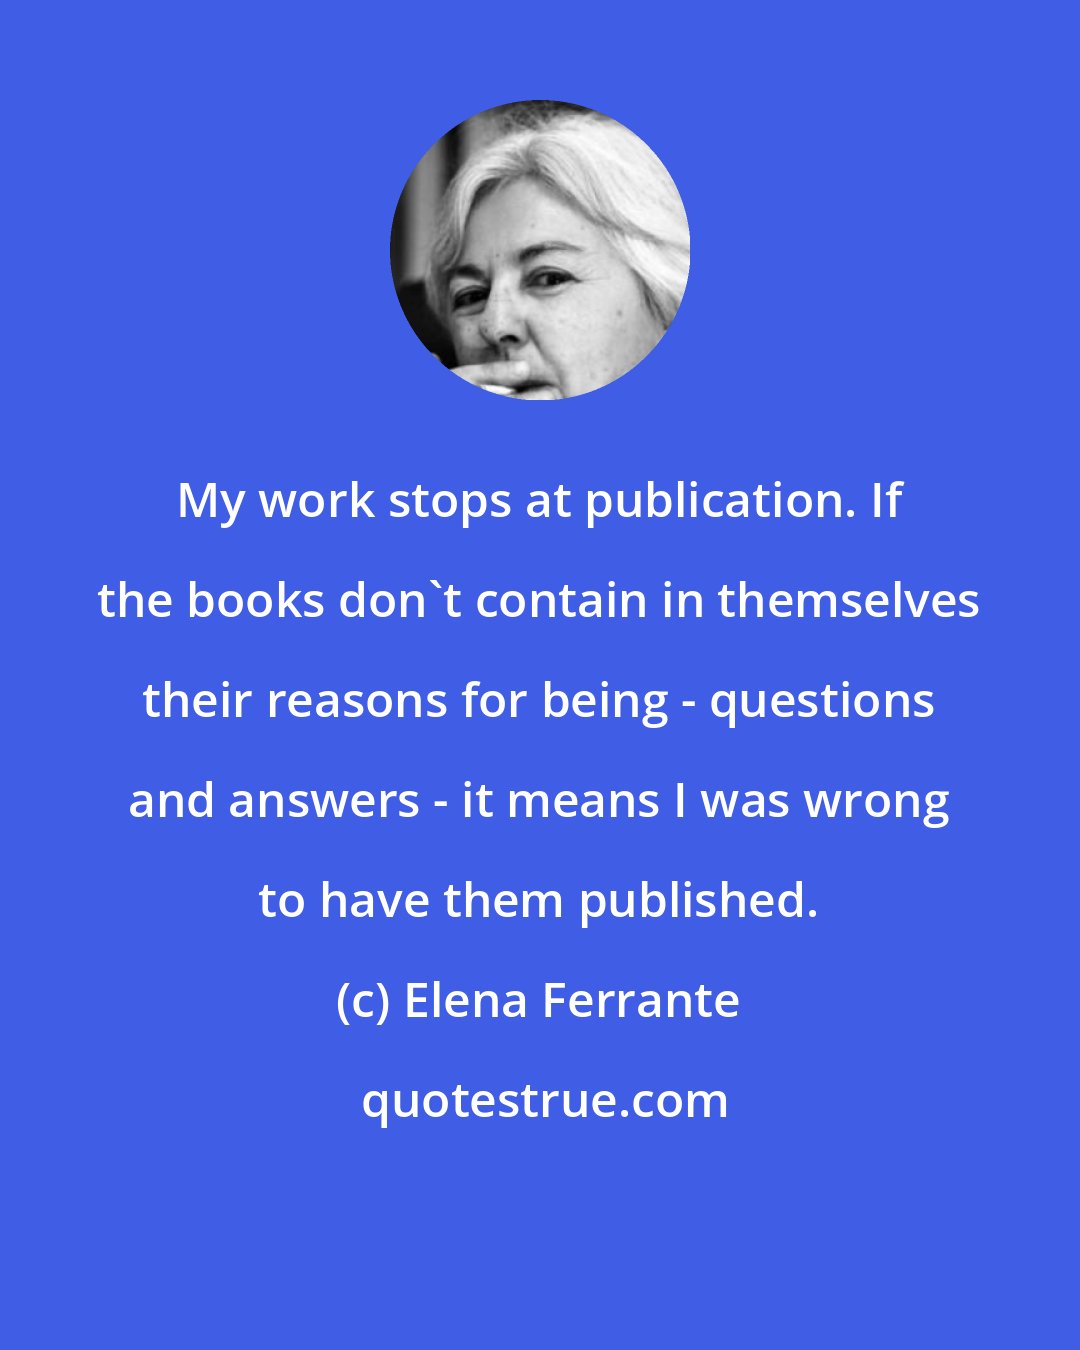 Elena Ferrante: My work stops at publication. If the books don't contain in themselves their reasons for being - questions and answers - it means I was wrong to have them published.